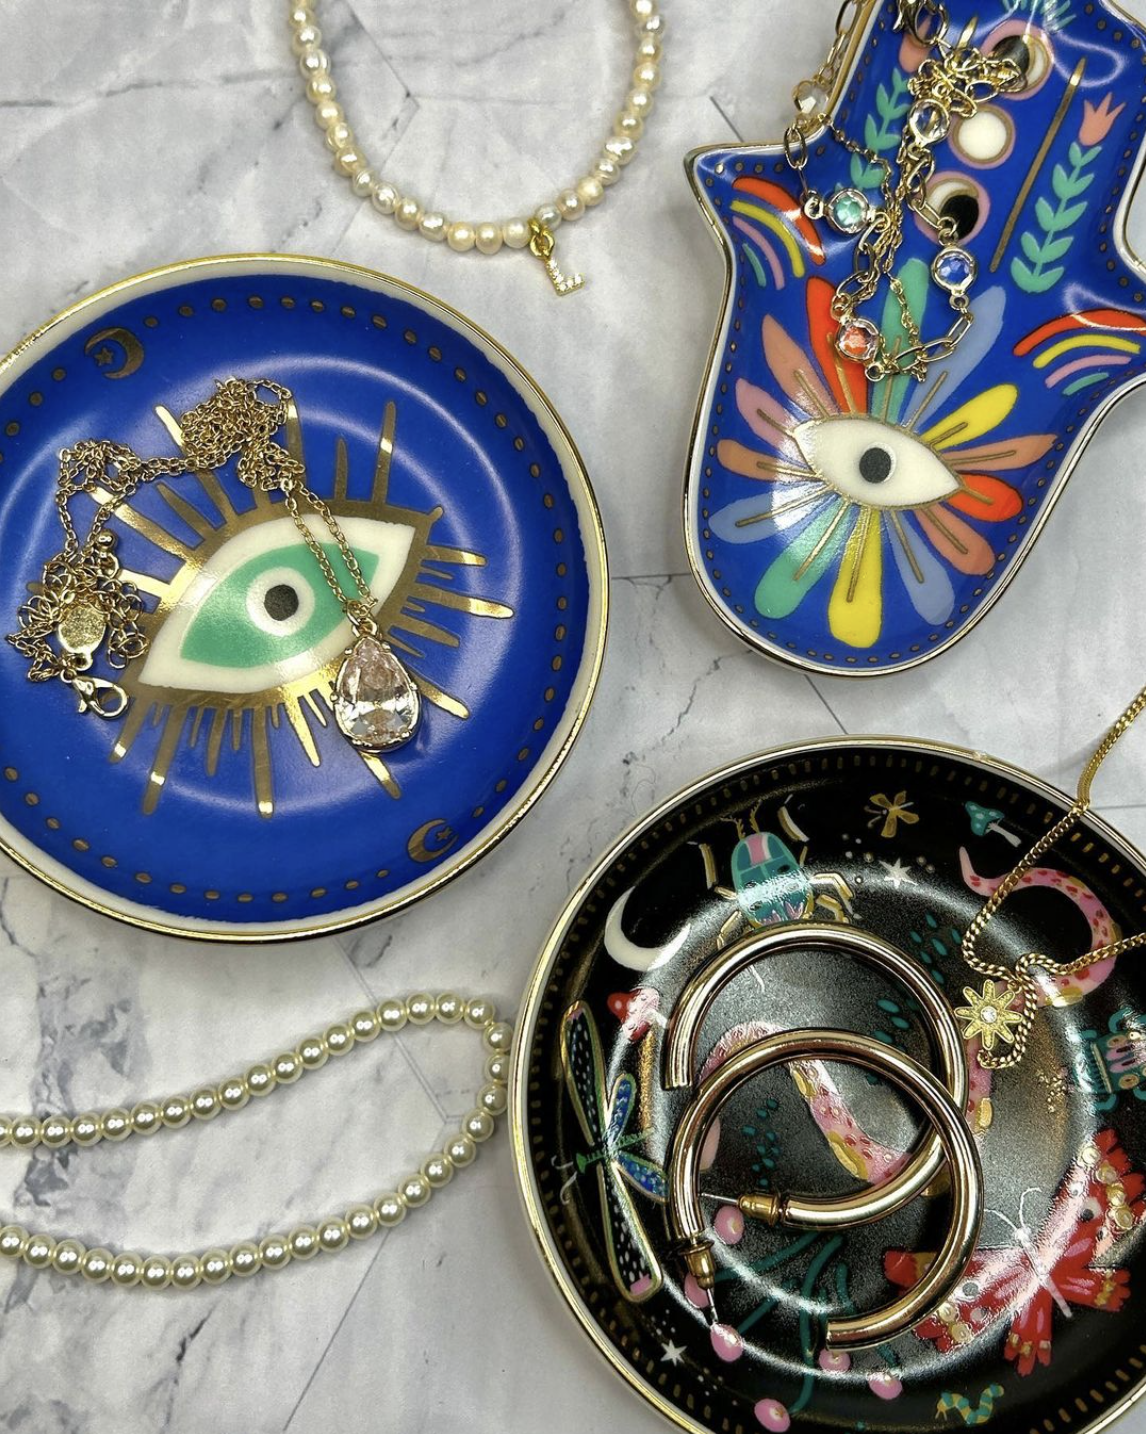 Jewelry dishes at Lou lou